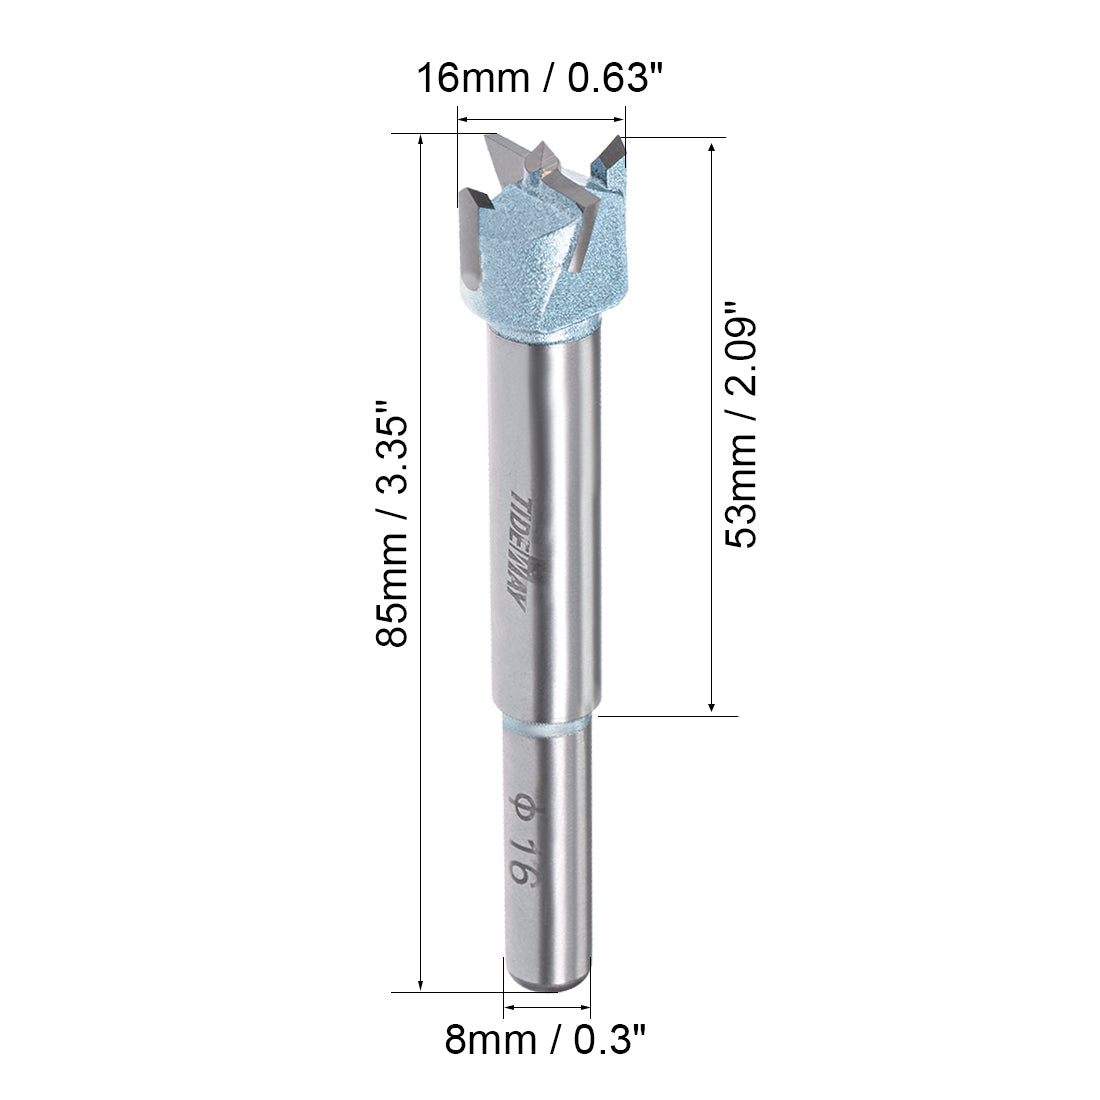 uxcell Uxcell Hinge Boring Forstner Drill Bit with 10mm Round Shank